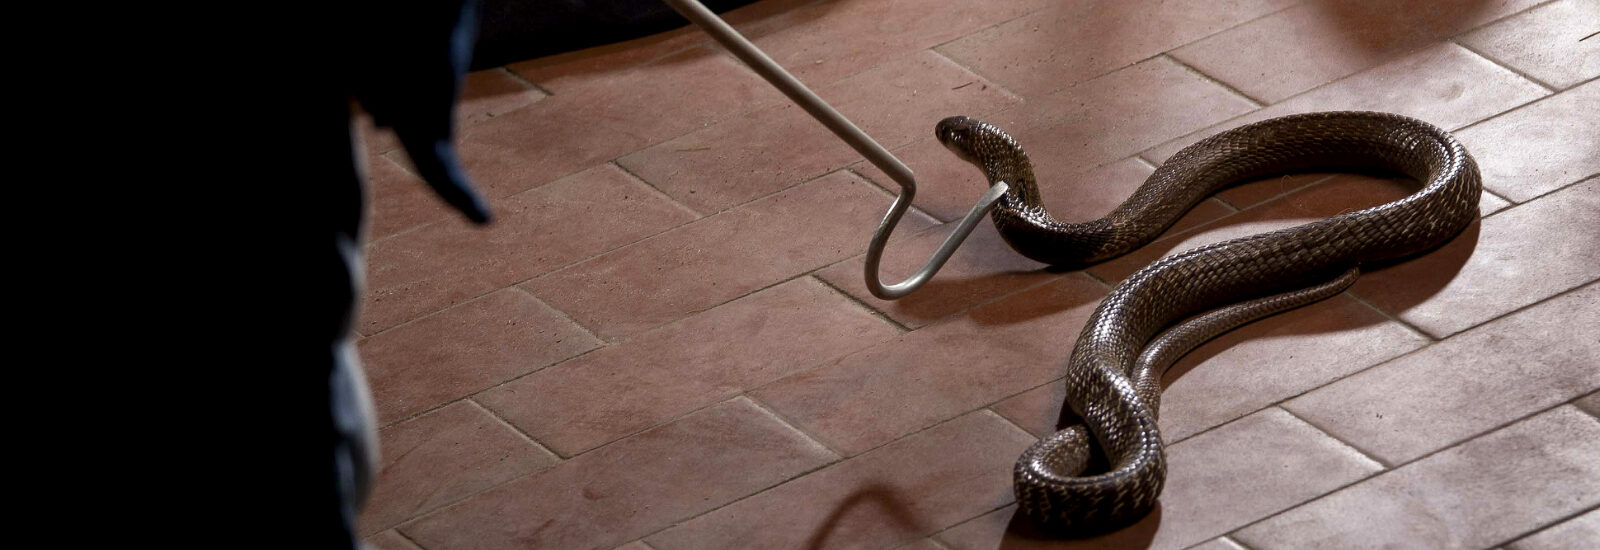 Snake coiled on the floor, with a catcher nearby